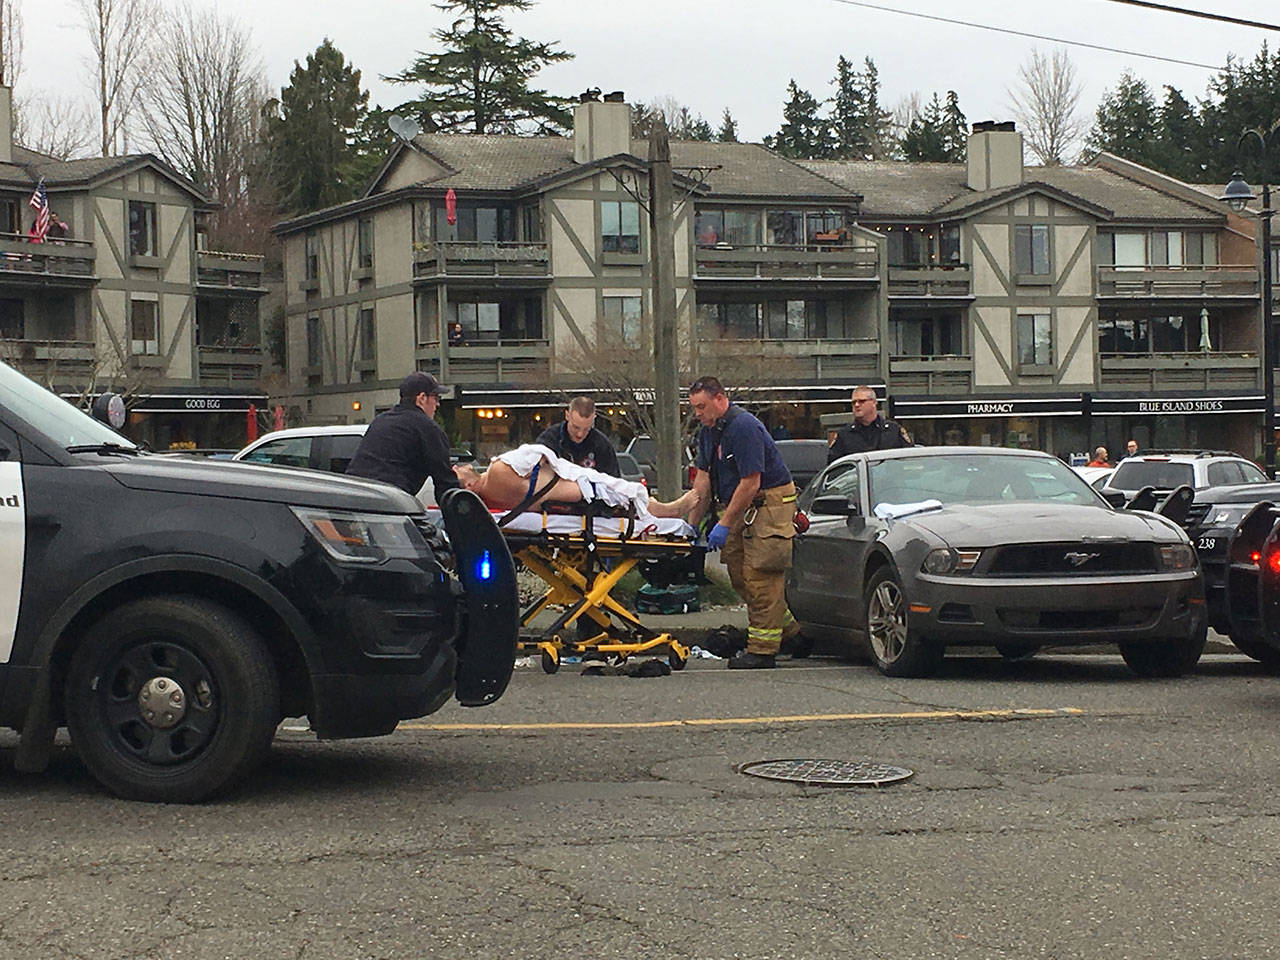 Medics take away a man who was shot Wednesday afternoon in downtown Winslow.